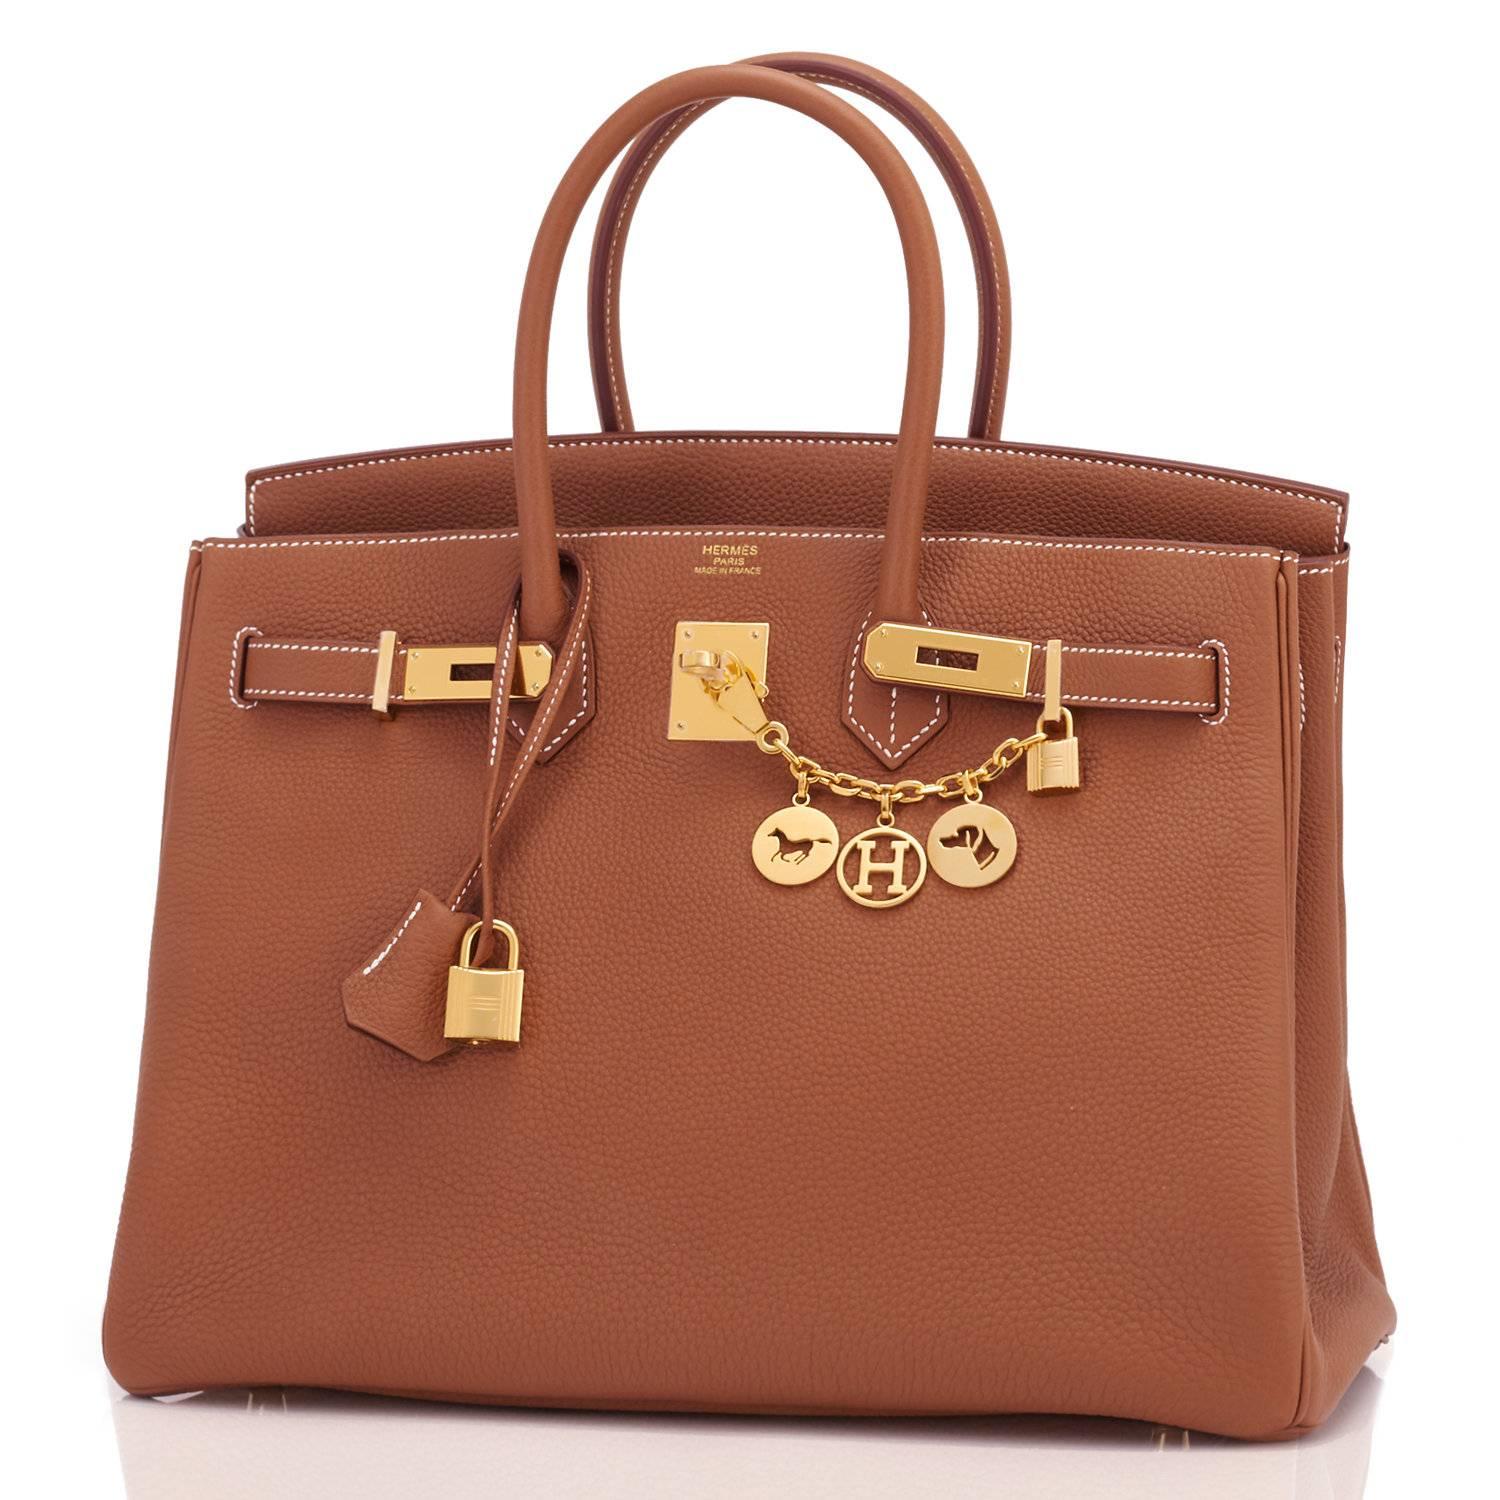 BANK WIRE PRICE ONLY!
Chicjoy presents Hermes Birkin 35 Gold Togo Tan Gold Hardware Bag U Stamp, 2022
The most spectacular holiday present!
Just purchased from Hermes store. Bag bears new 2022 interior U Stamp.
Brand New in Box. Store Fresh.